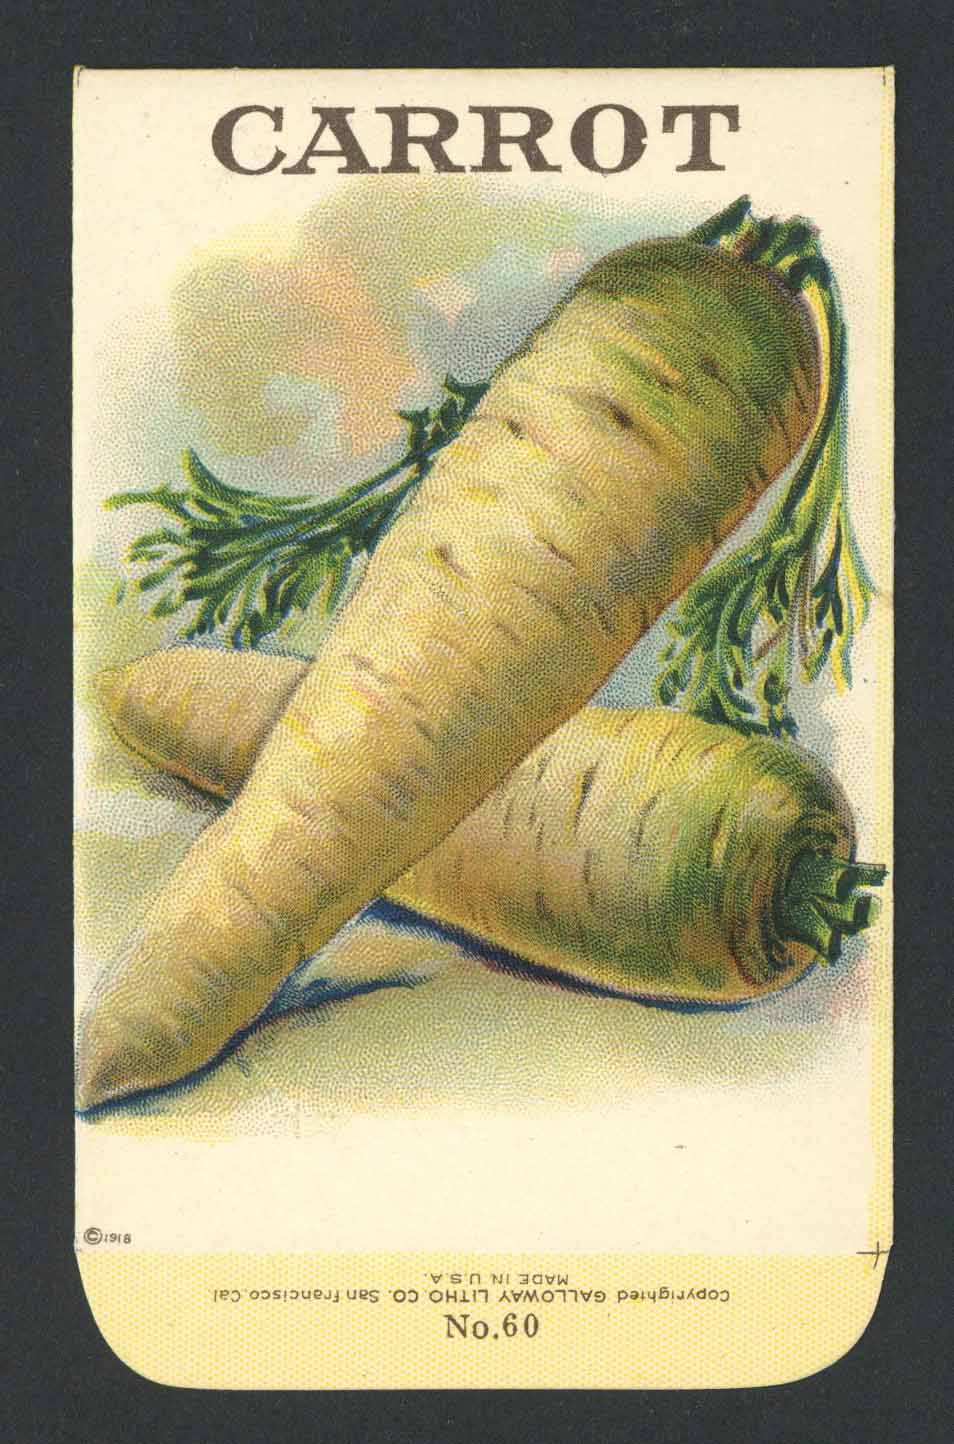 Carrot Antique Stock Seed Packet